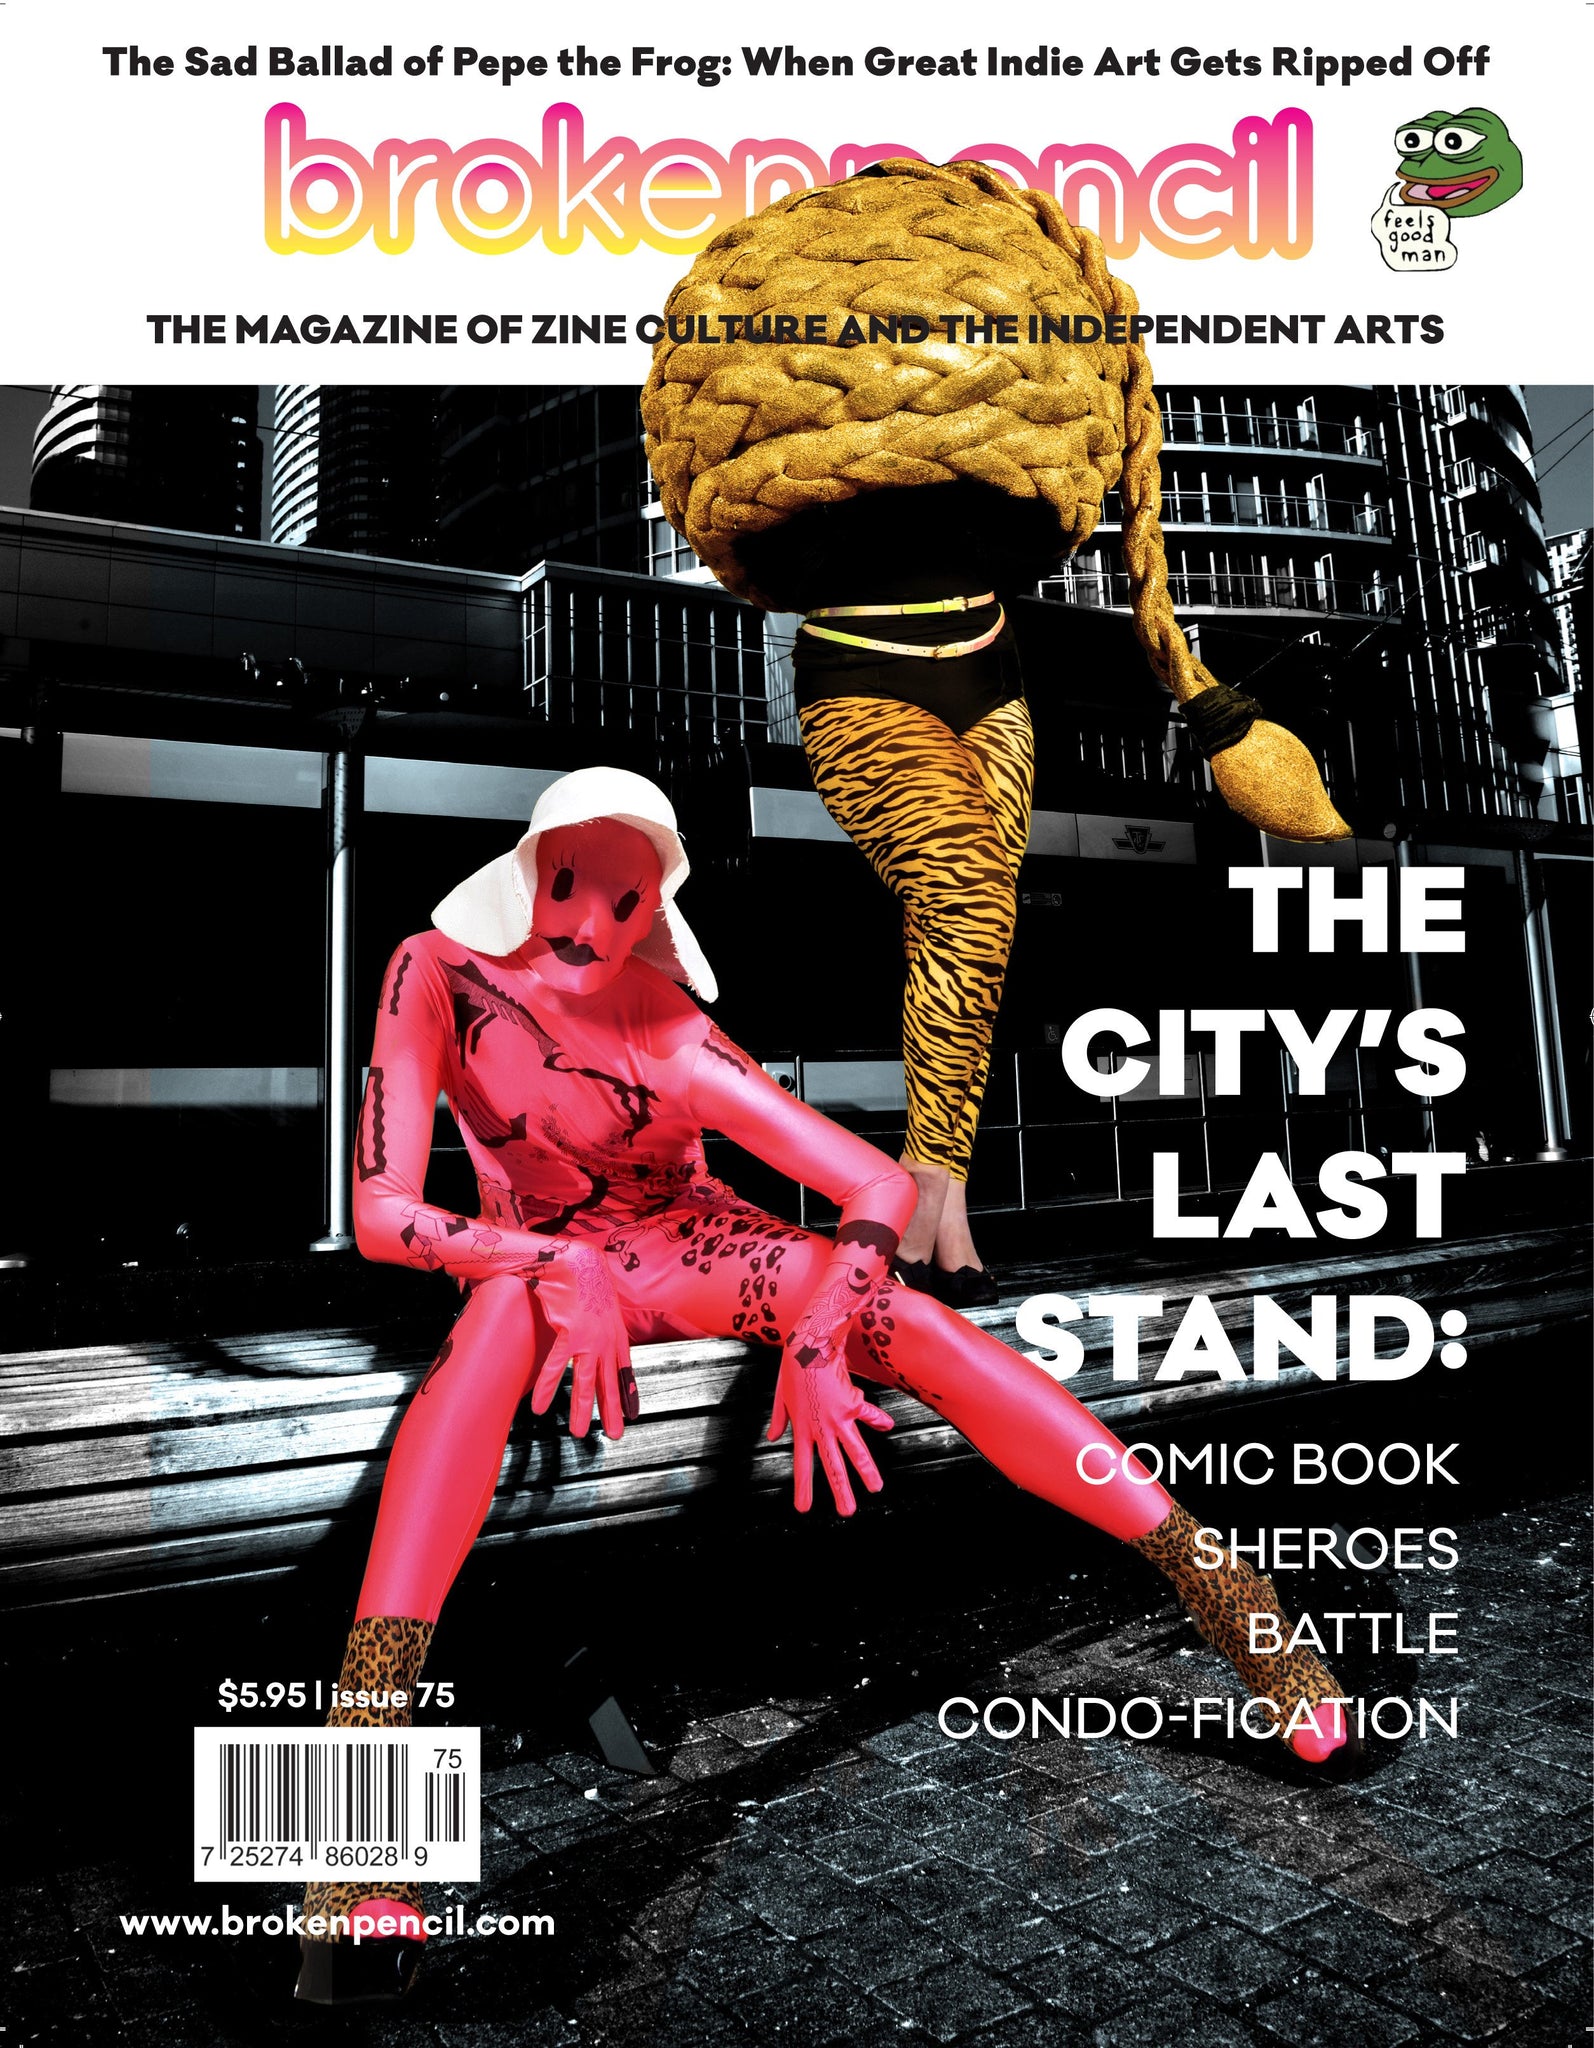 Issue 75: The City's Last Stand: Comic Book Sheroes Battle Condification!